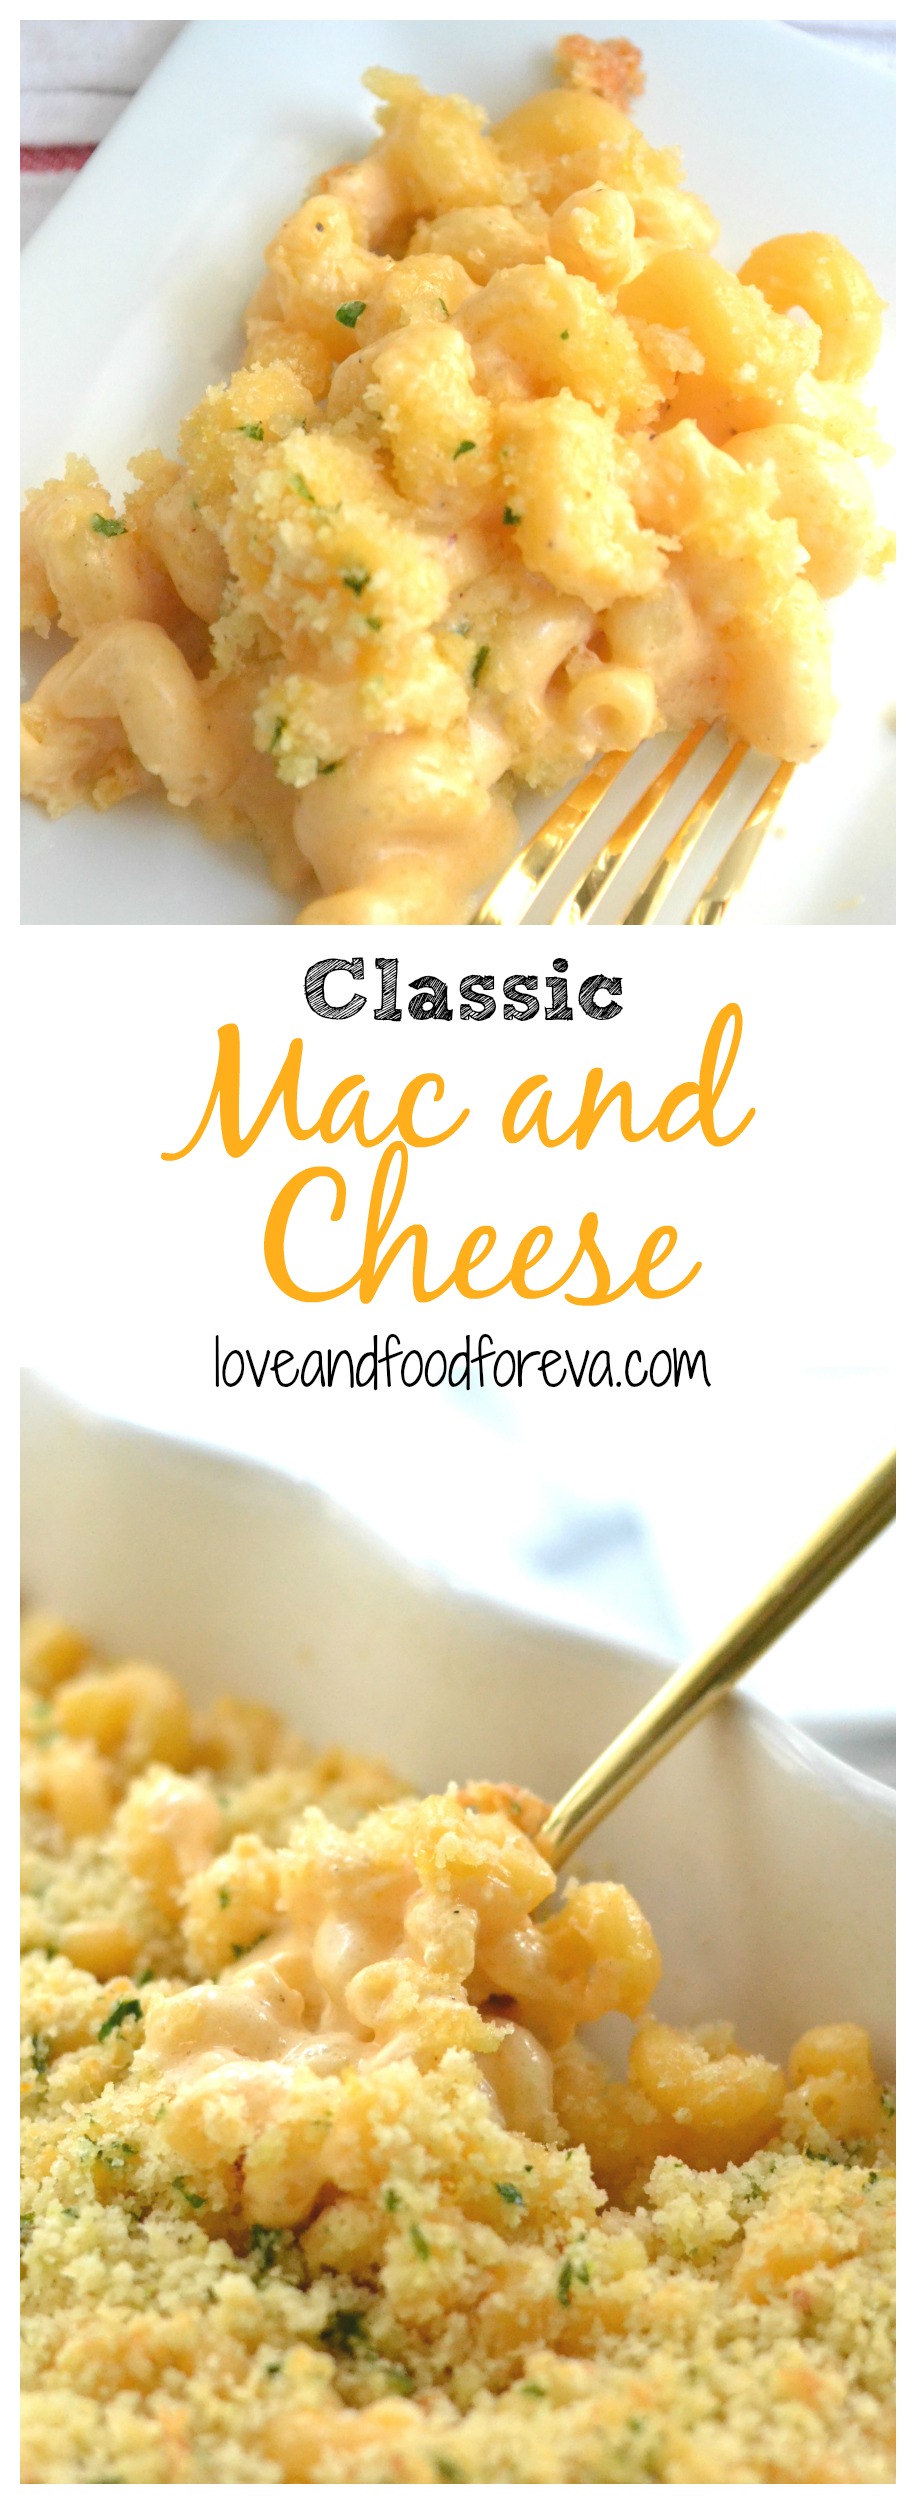 Classic Mac and Cheese with Panko Crumb Topping: creamy and gooey with a crunch!